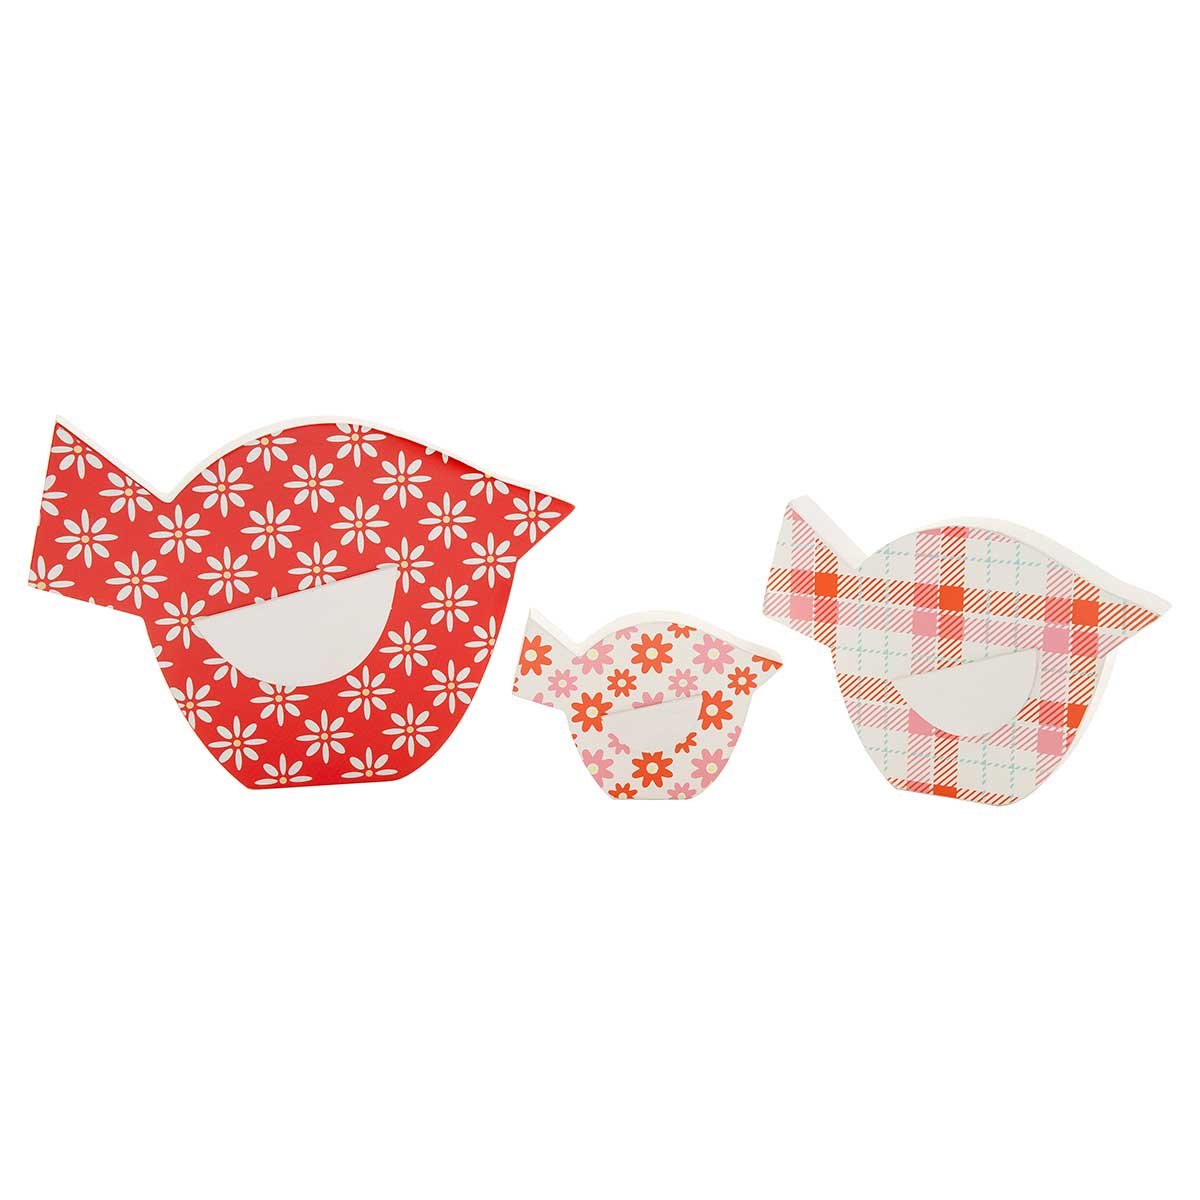 CORAL FAIR WOOD CHICKADEE SIT-A-BOUT CORAL/WHITE FLORAL